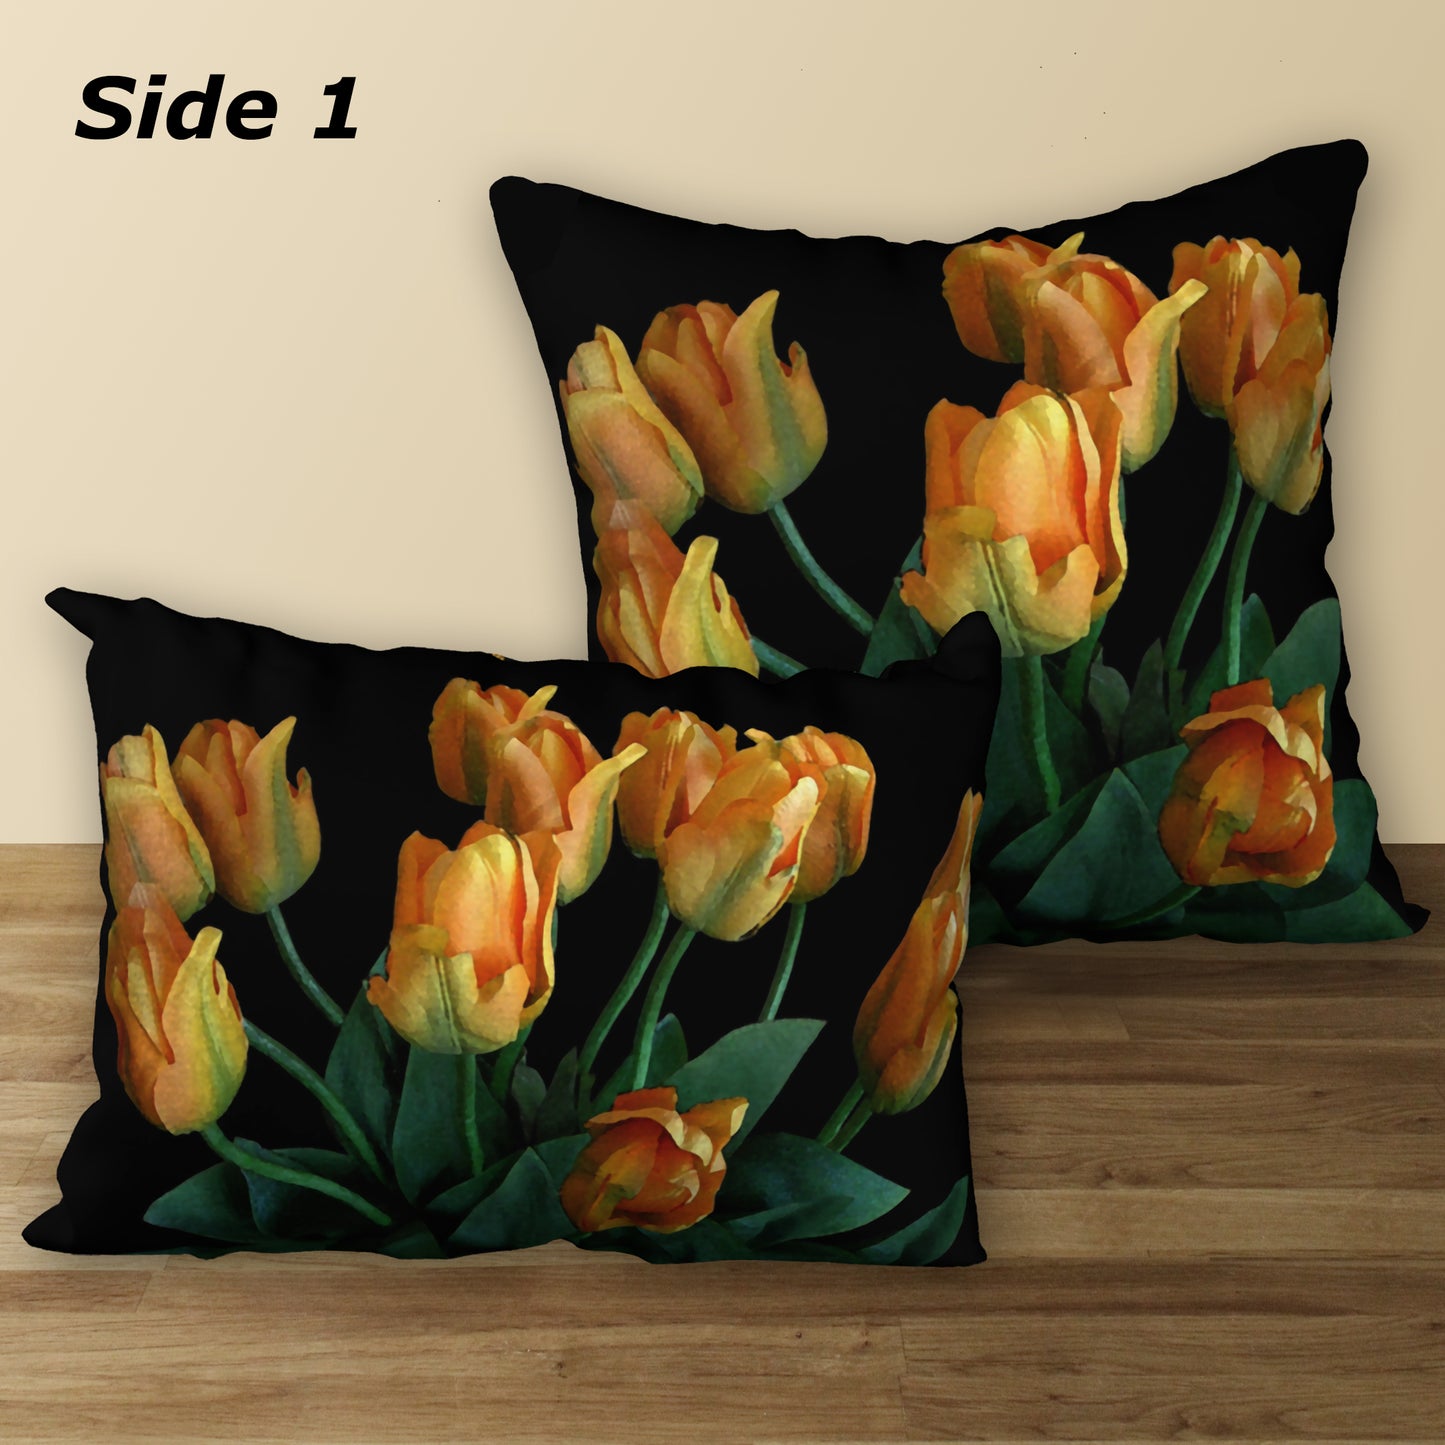 Set of 2 Tulips on Black Designer Pillows, 20"x14" and 18"x18"